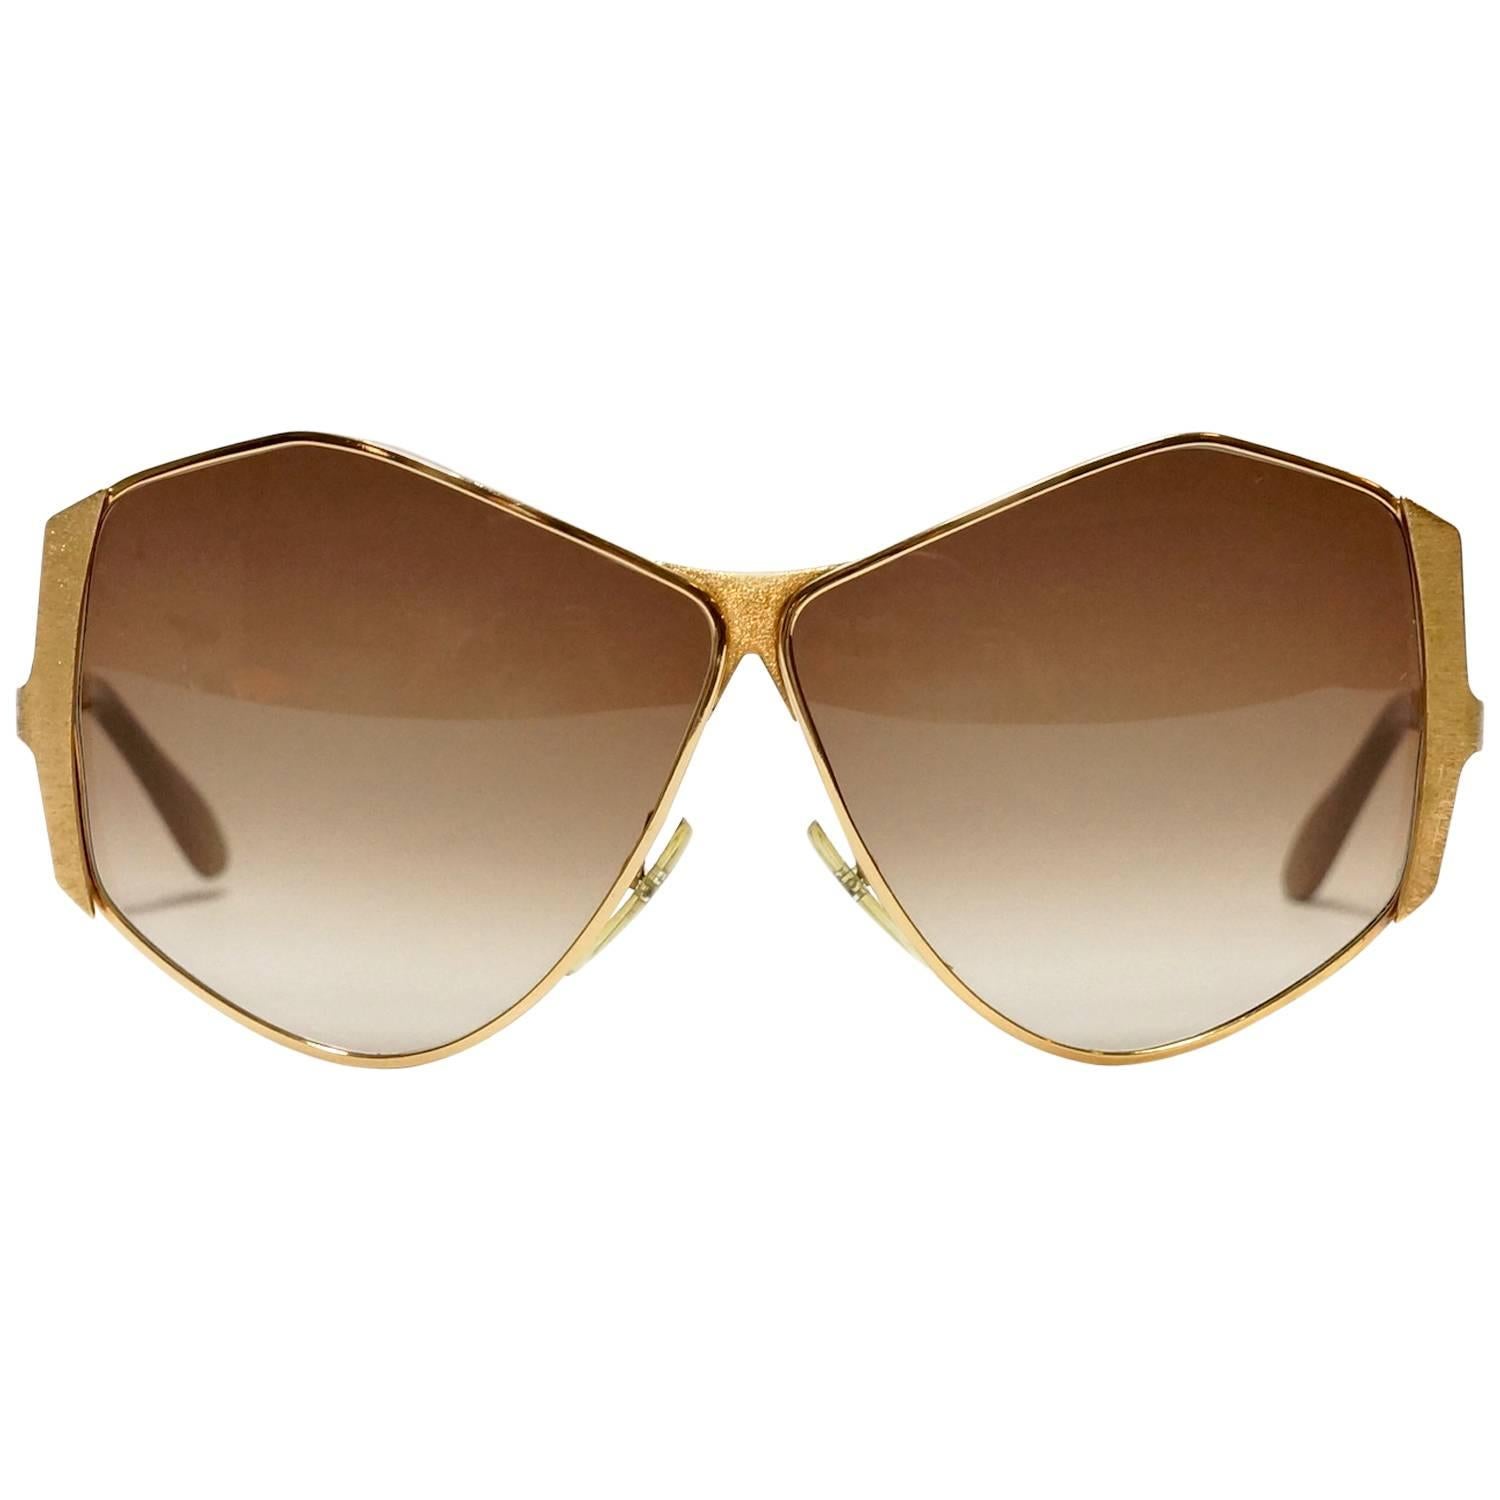 1970s Neostyle Gold Metal Vintage Sunglasses - model Tinair For Sale